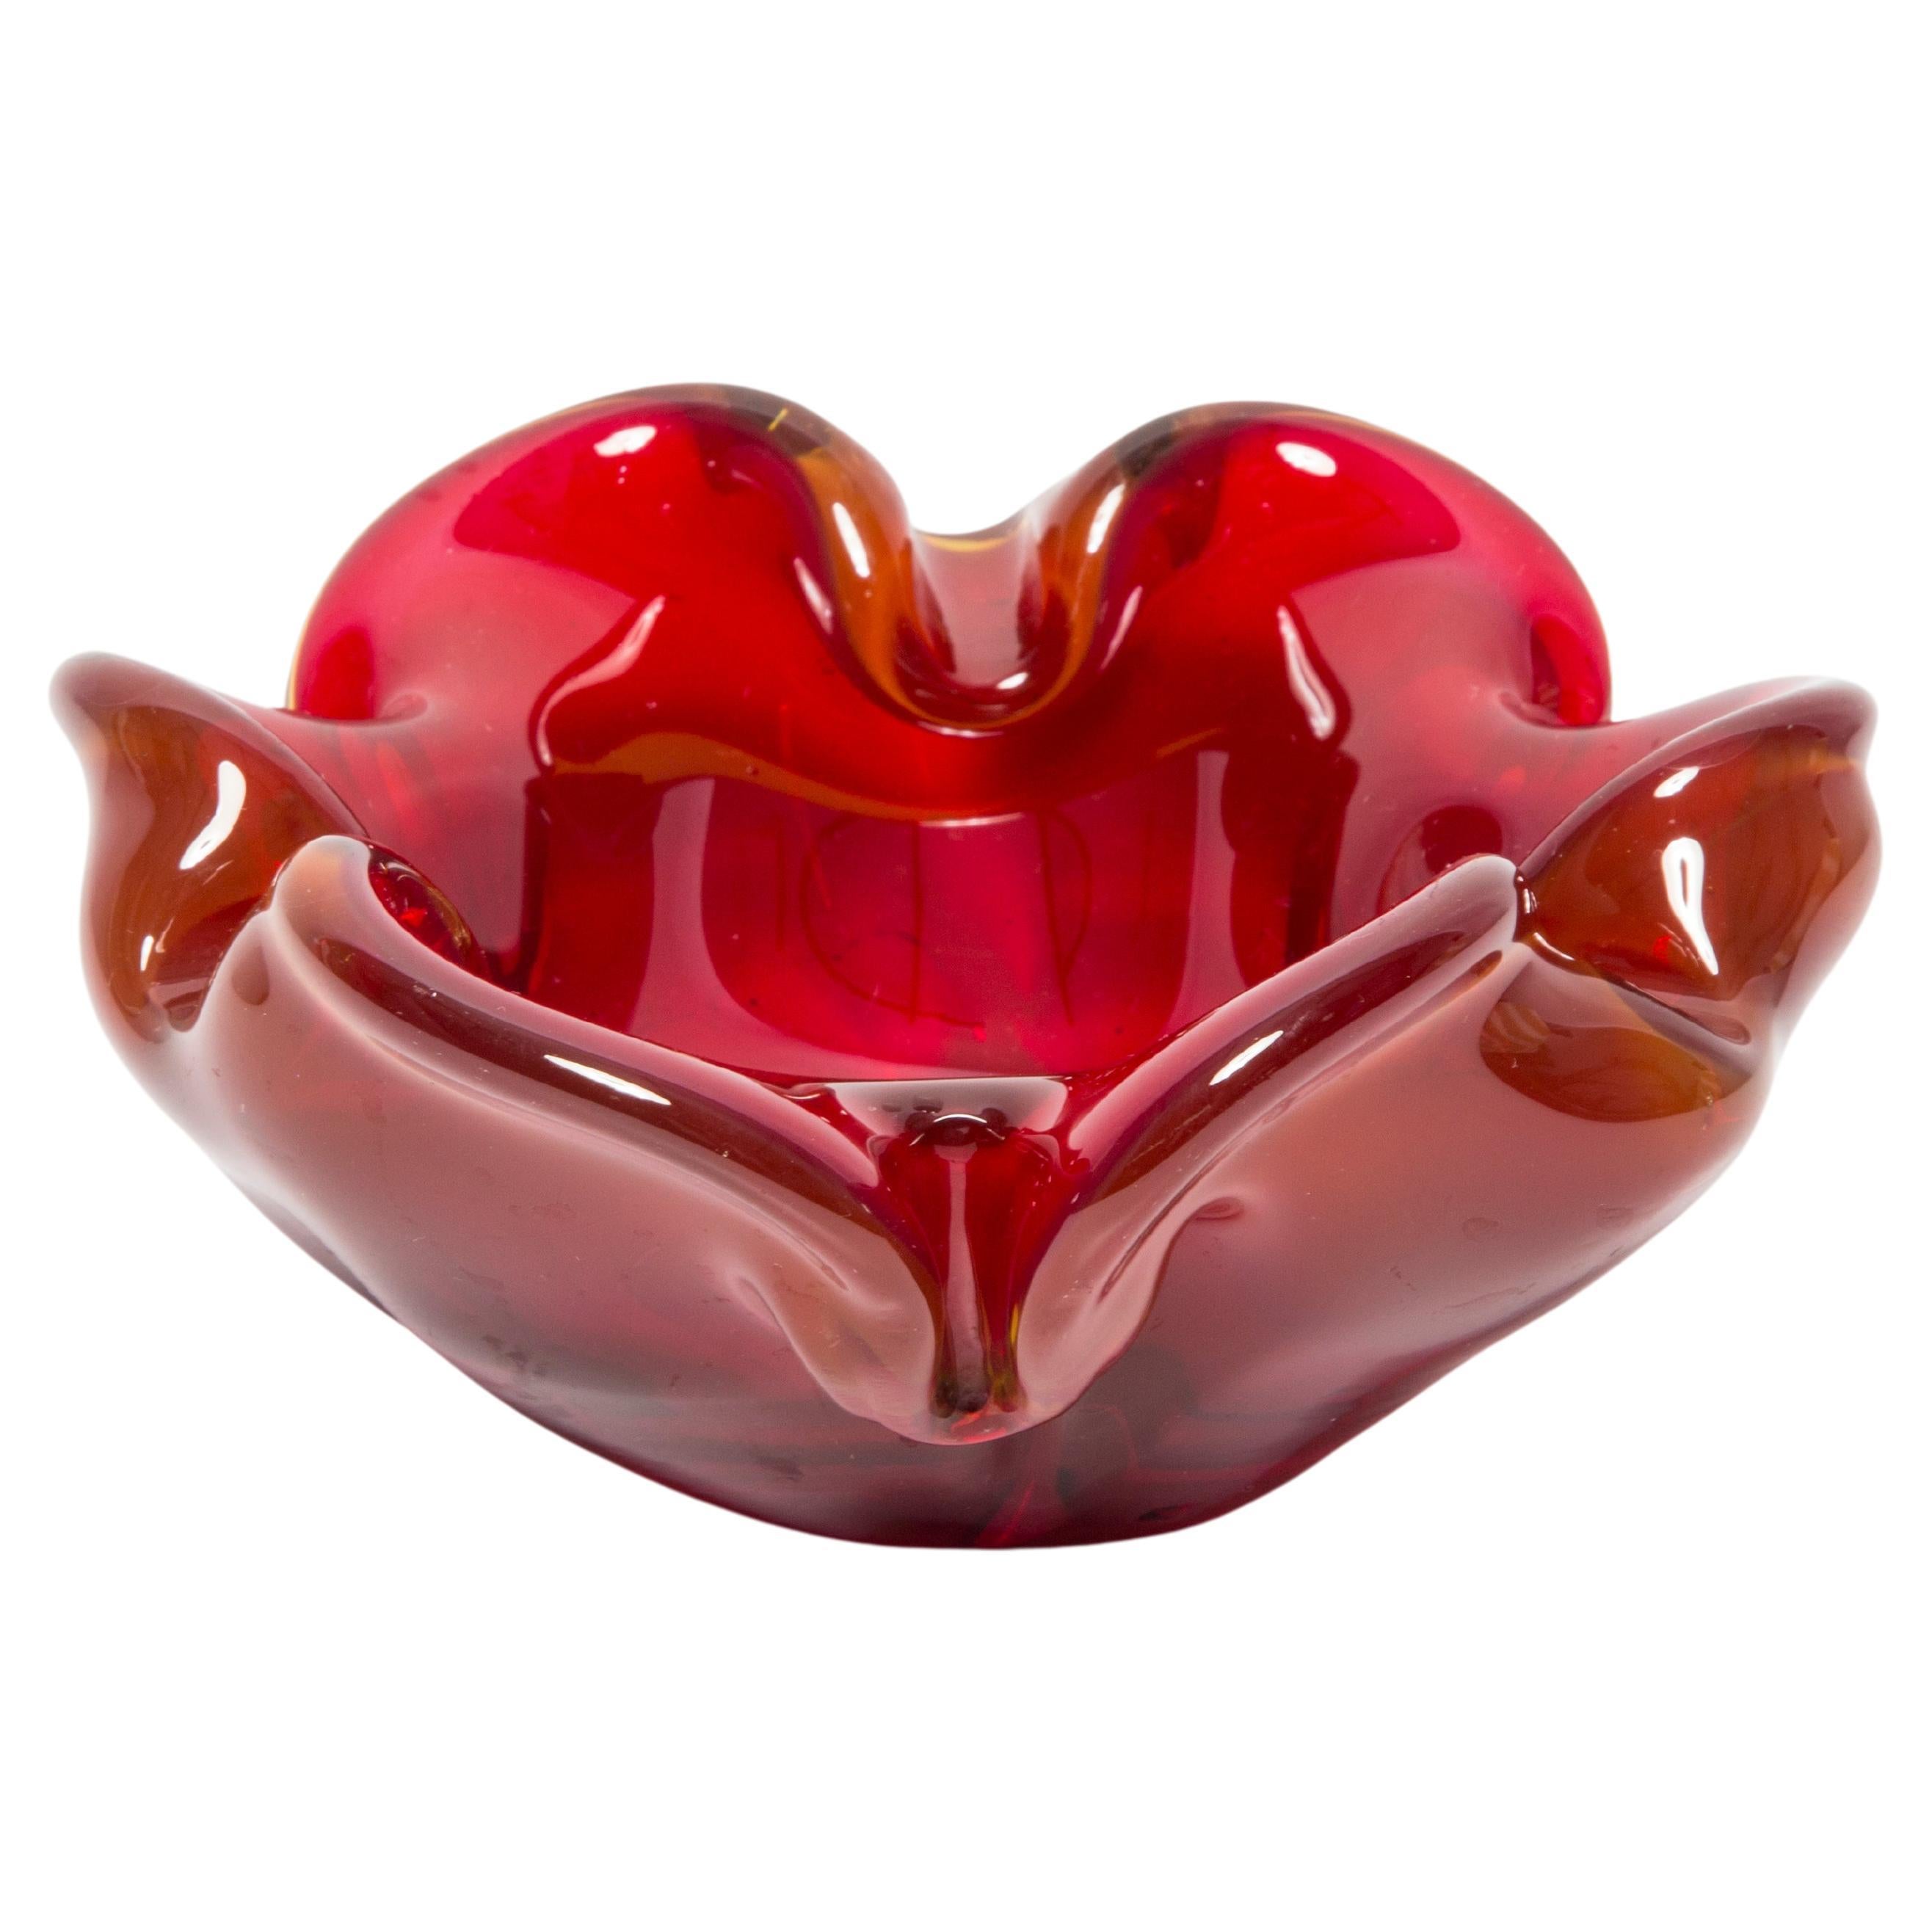 Mid Century Crystal Red Artistic Glass Ashtray Bowl, Italy, 1970s